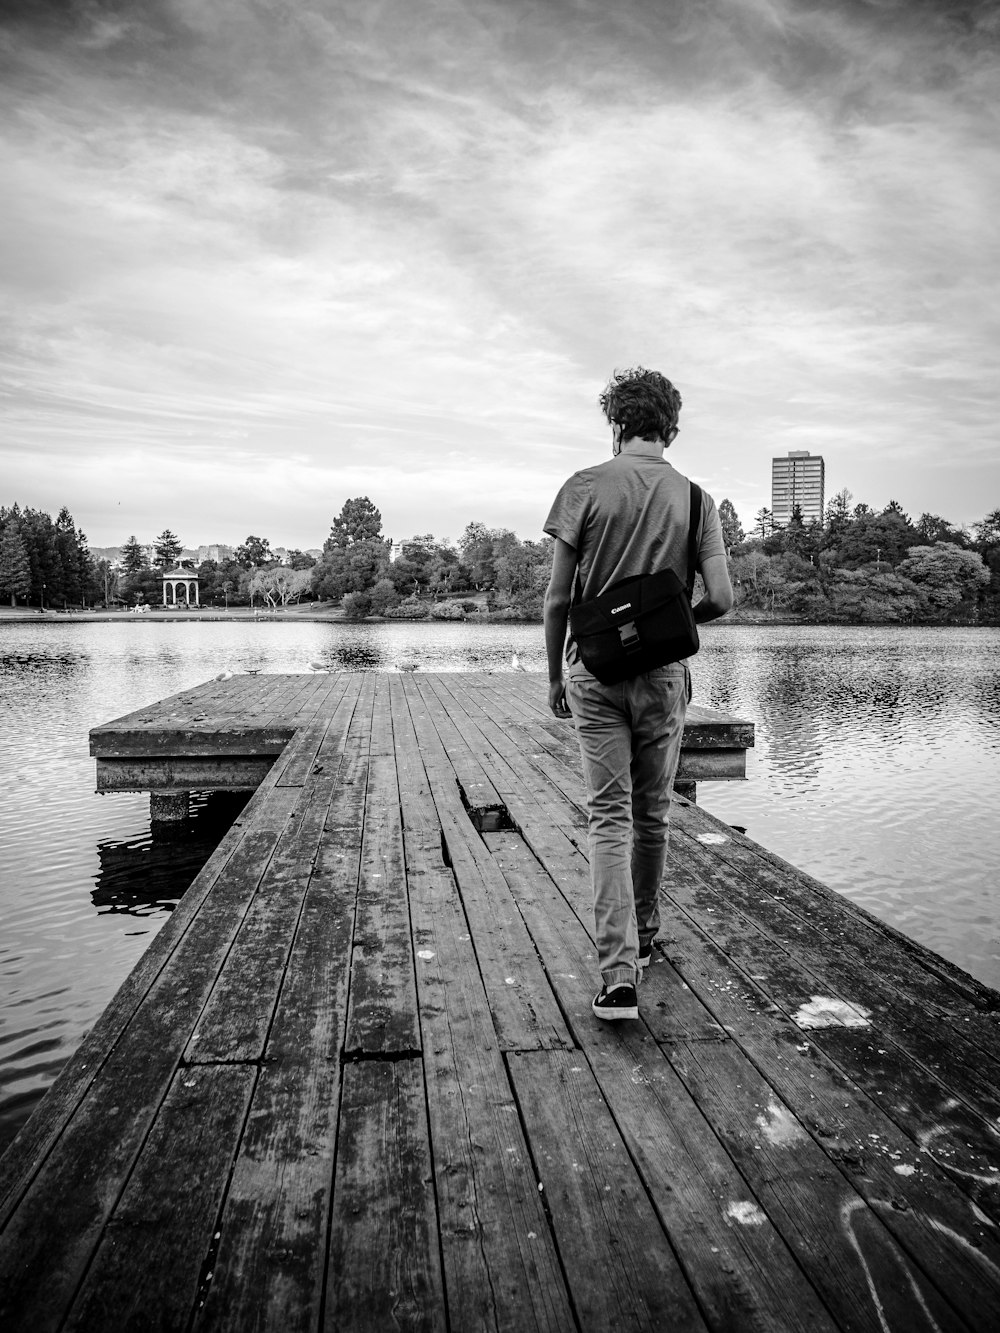 man in black jacket and pants standing on wooden dock in grayscale photography